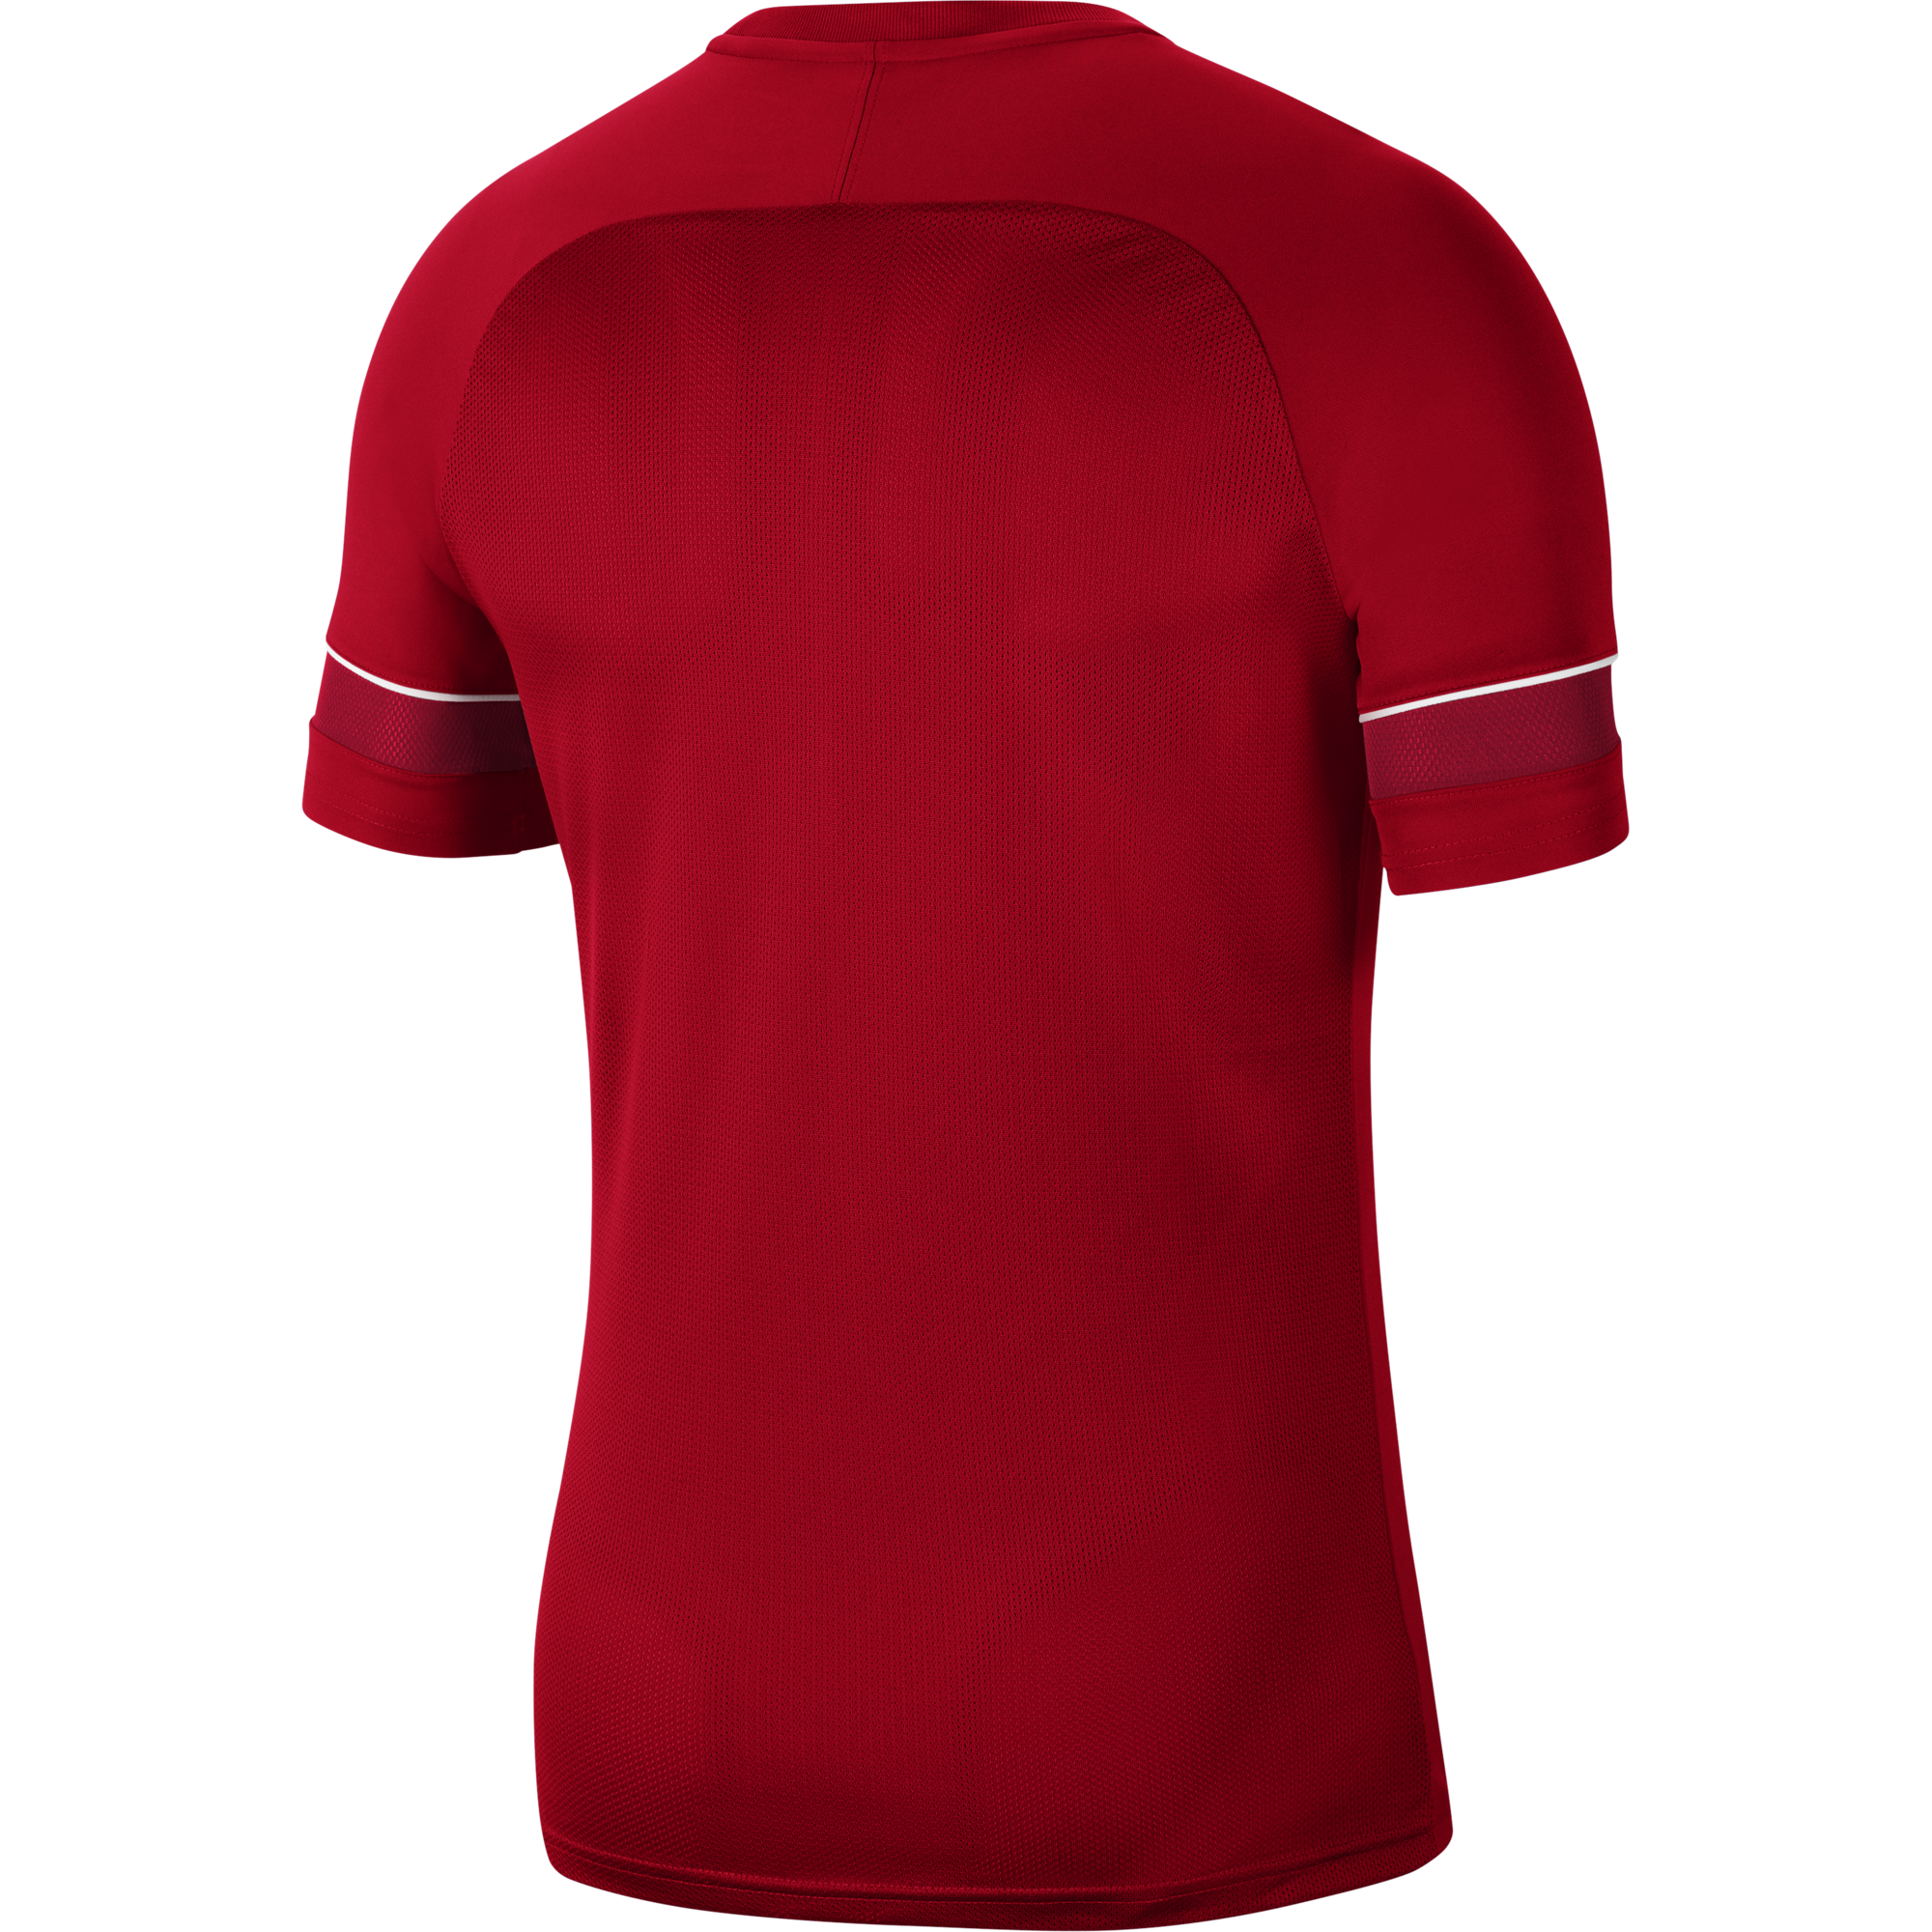 Academy 21 Training Top (Youth)